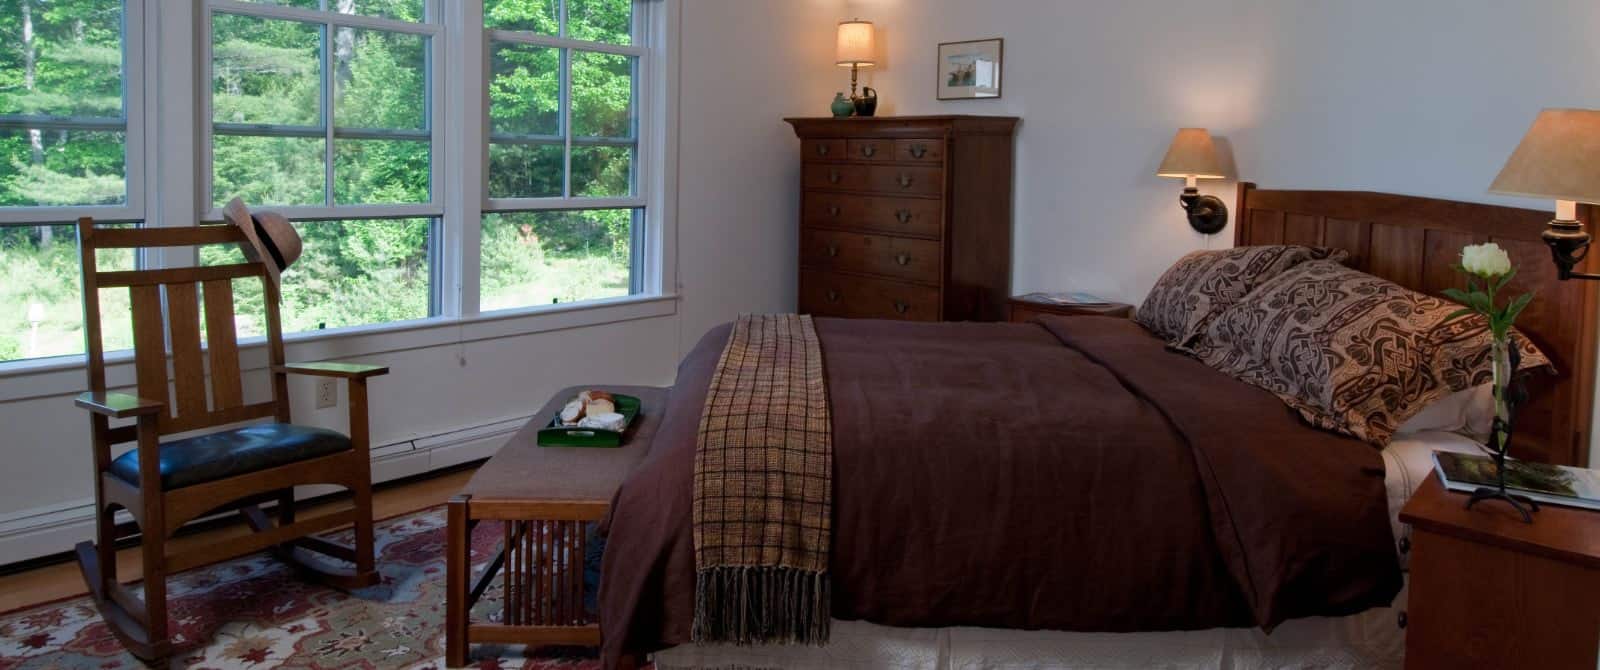 Bedroom with craftsman-style furniture, bed made up in cozy brown comforter with a colorful rug on wooden floor.